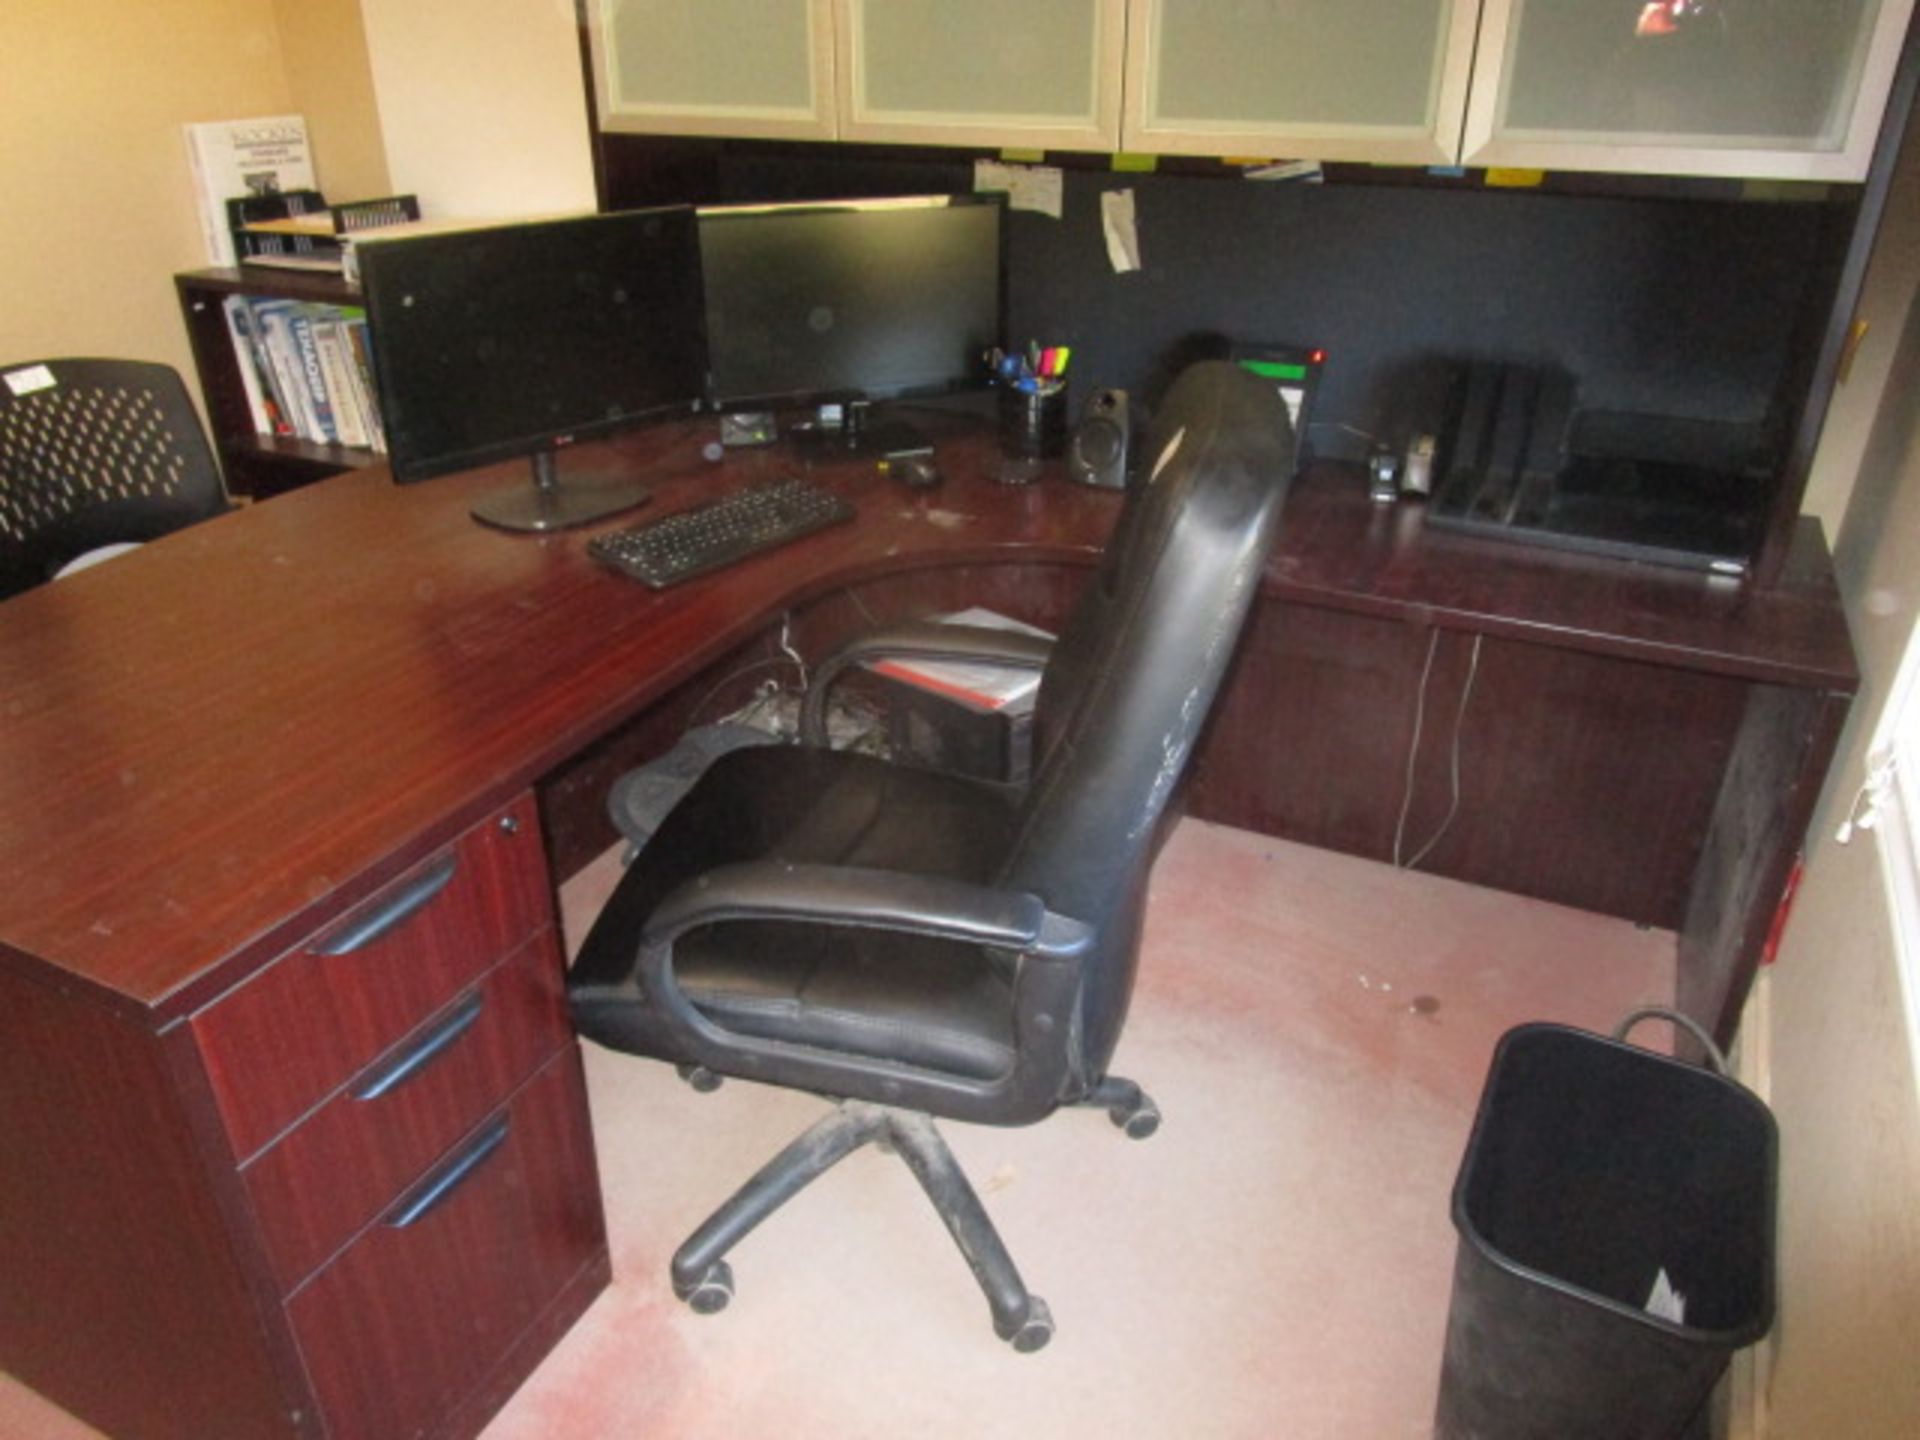 Complete Office Contents - includes Desk with Overshelf, 3 Chairs, 4 Door lateral filing cabinets, - Image 5 of 5